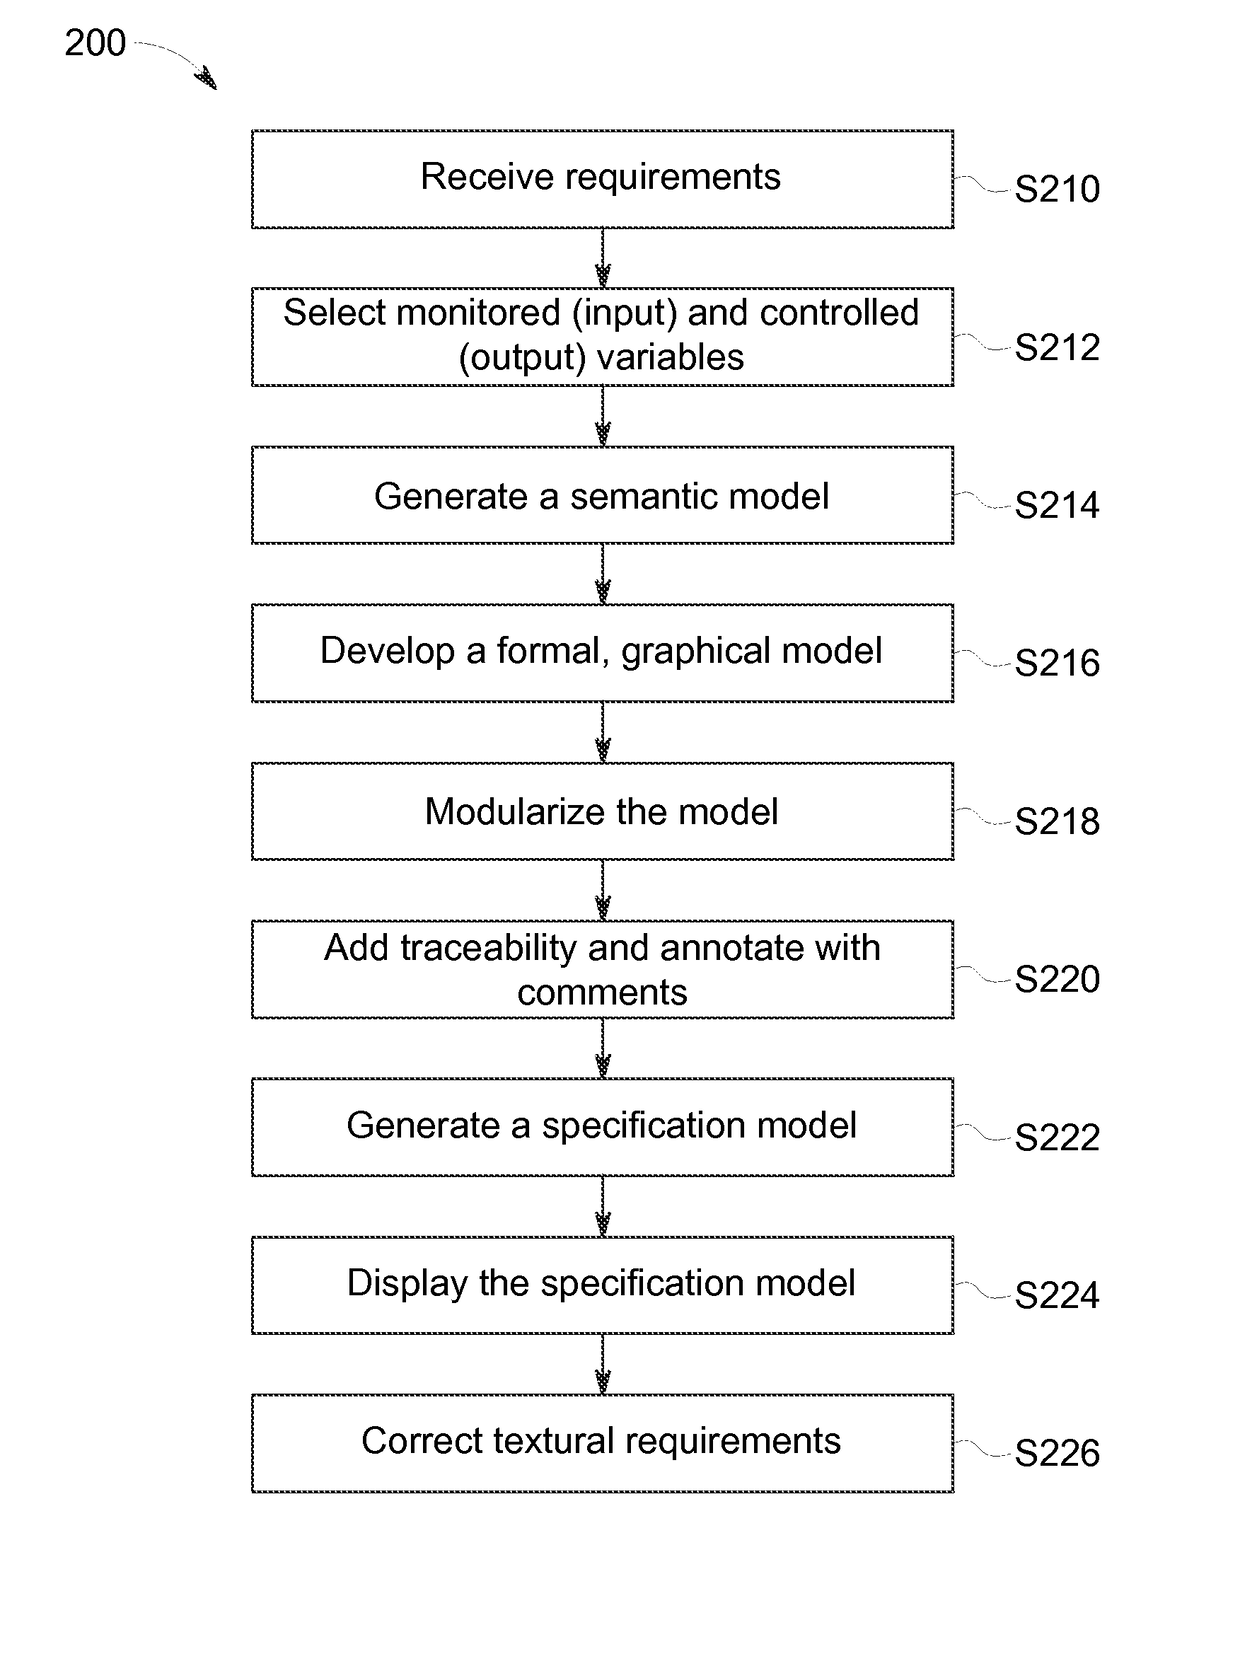 Method and system of software specification modeling